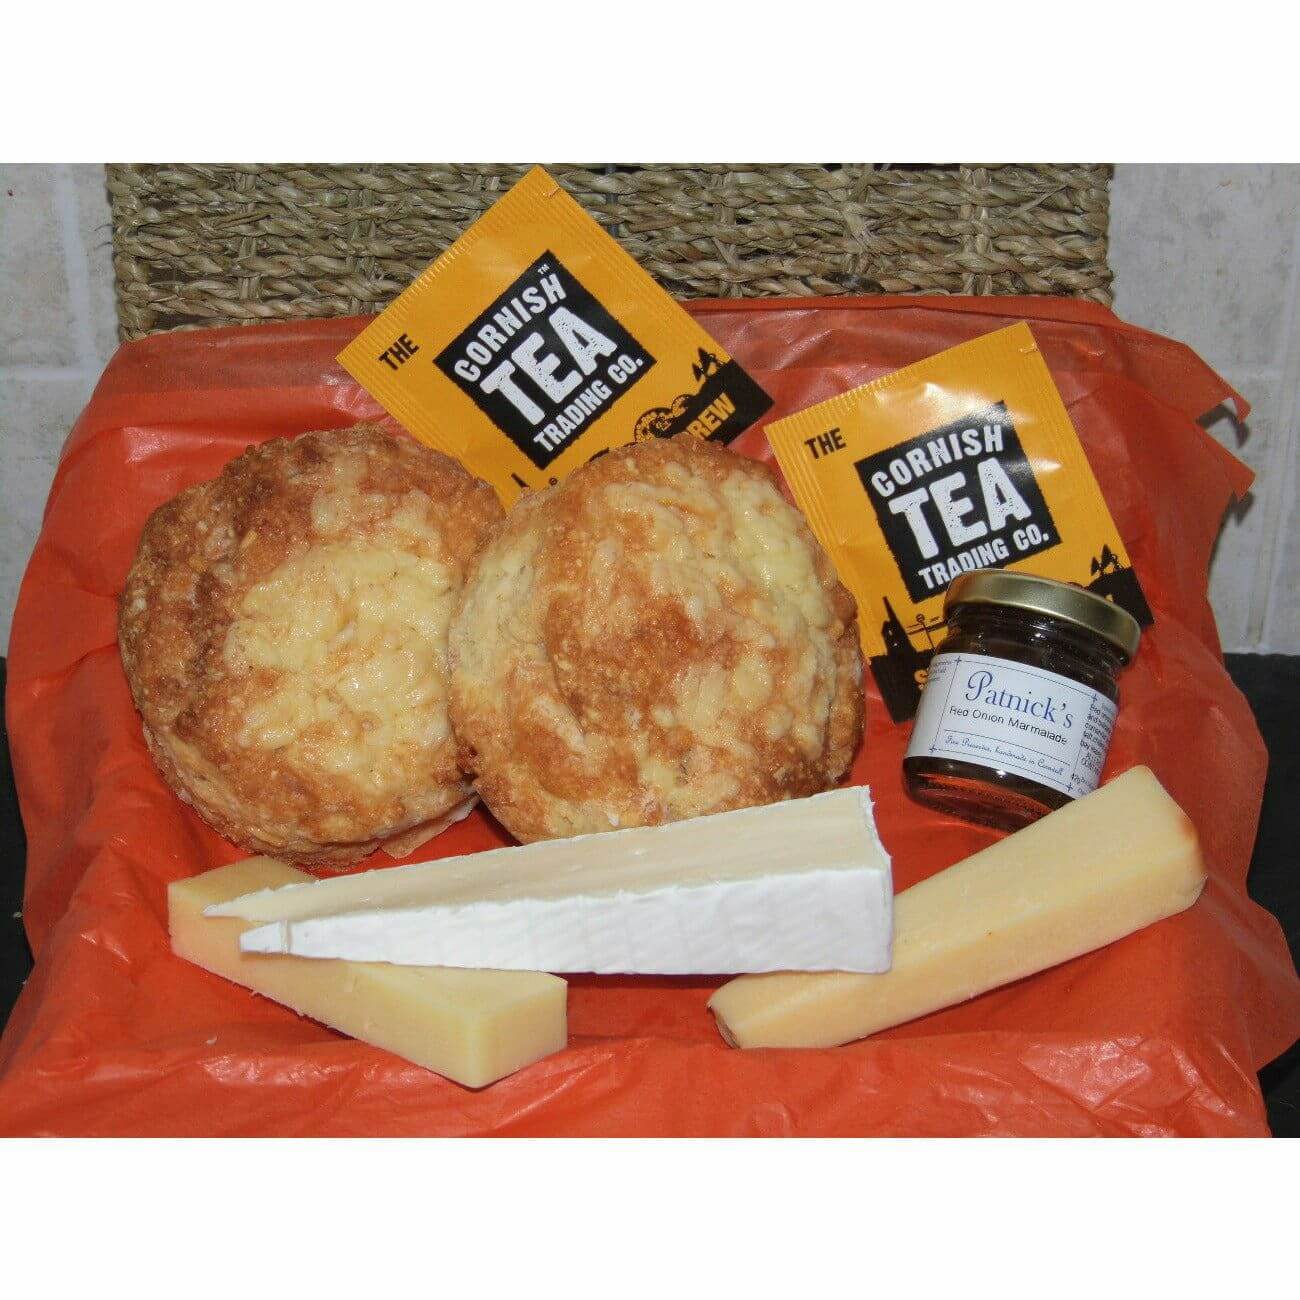 Gluten Free Savoury Afternoon Tea Hamper for One - The Cornish Scone Company